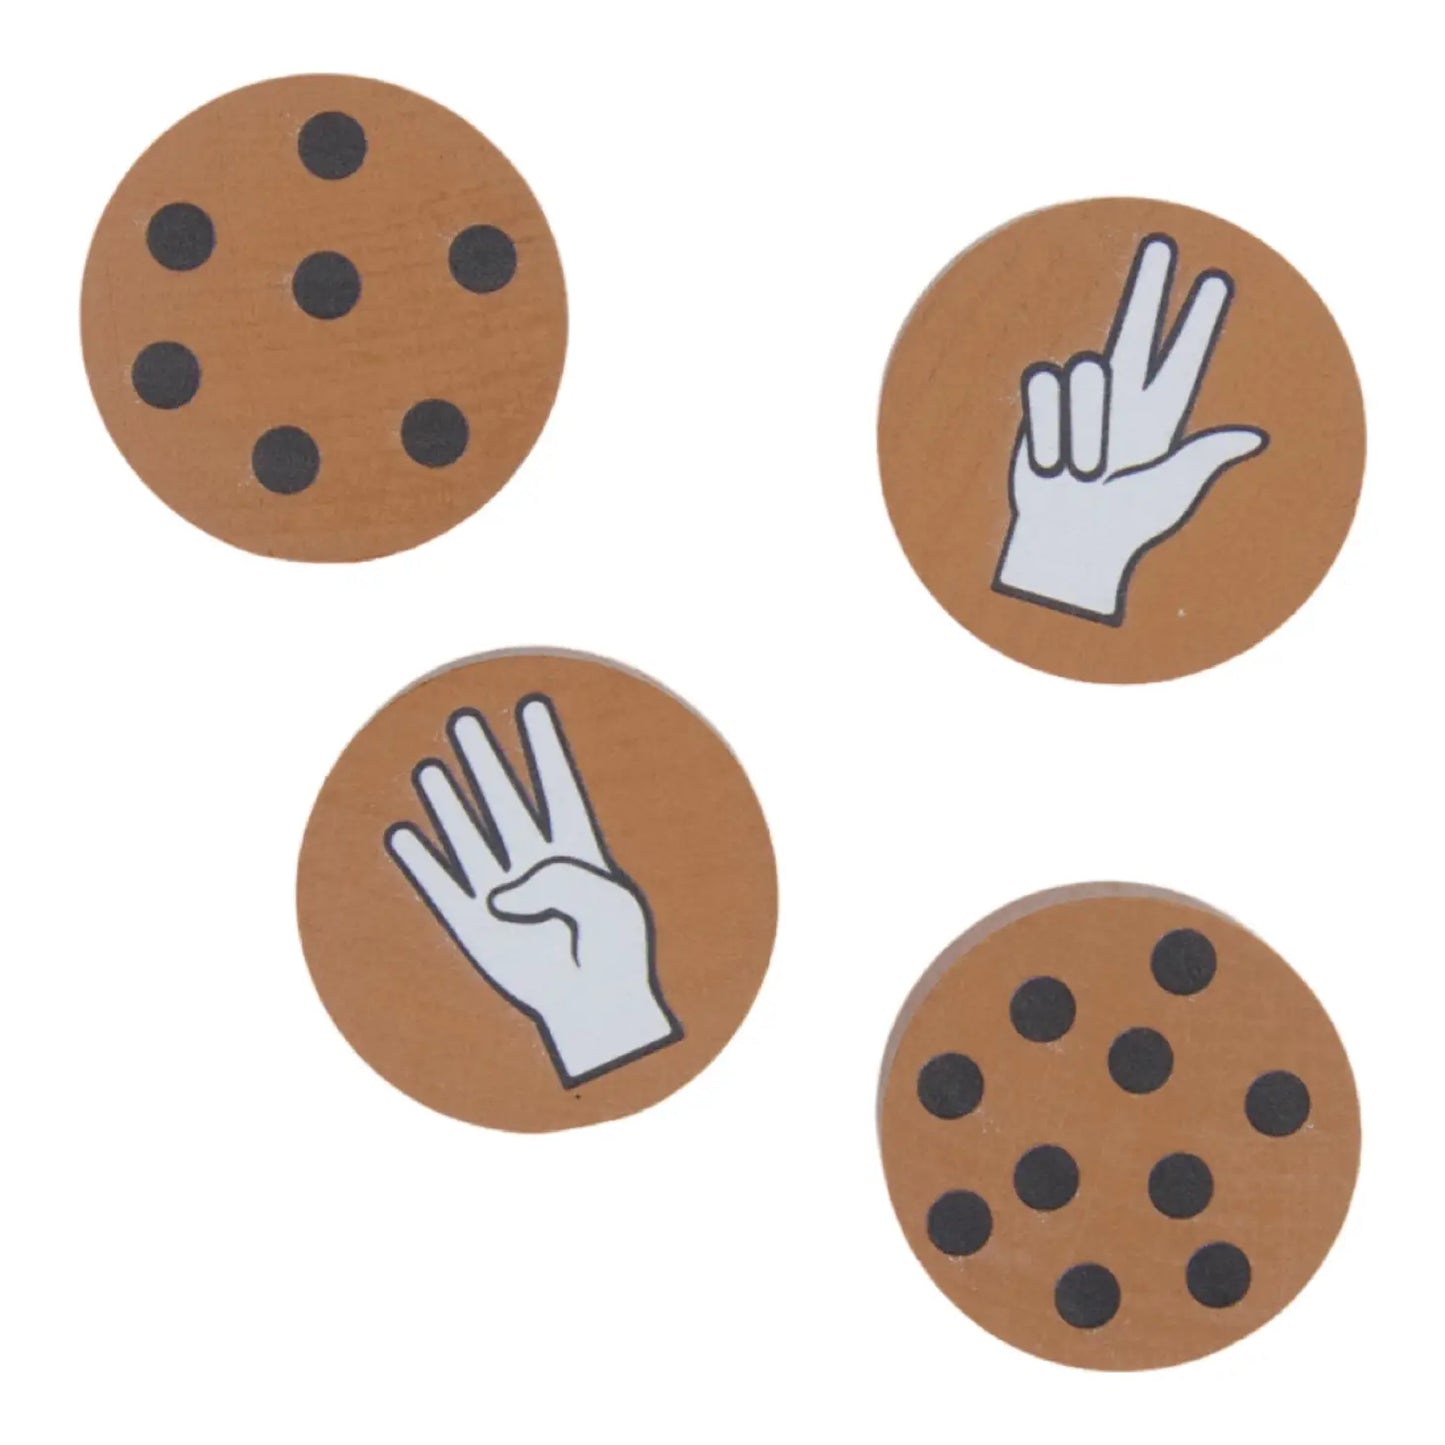 Eco-friendly Wood Cookie Counting Monkey Puzzle - Sign Language Puzzle